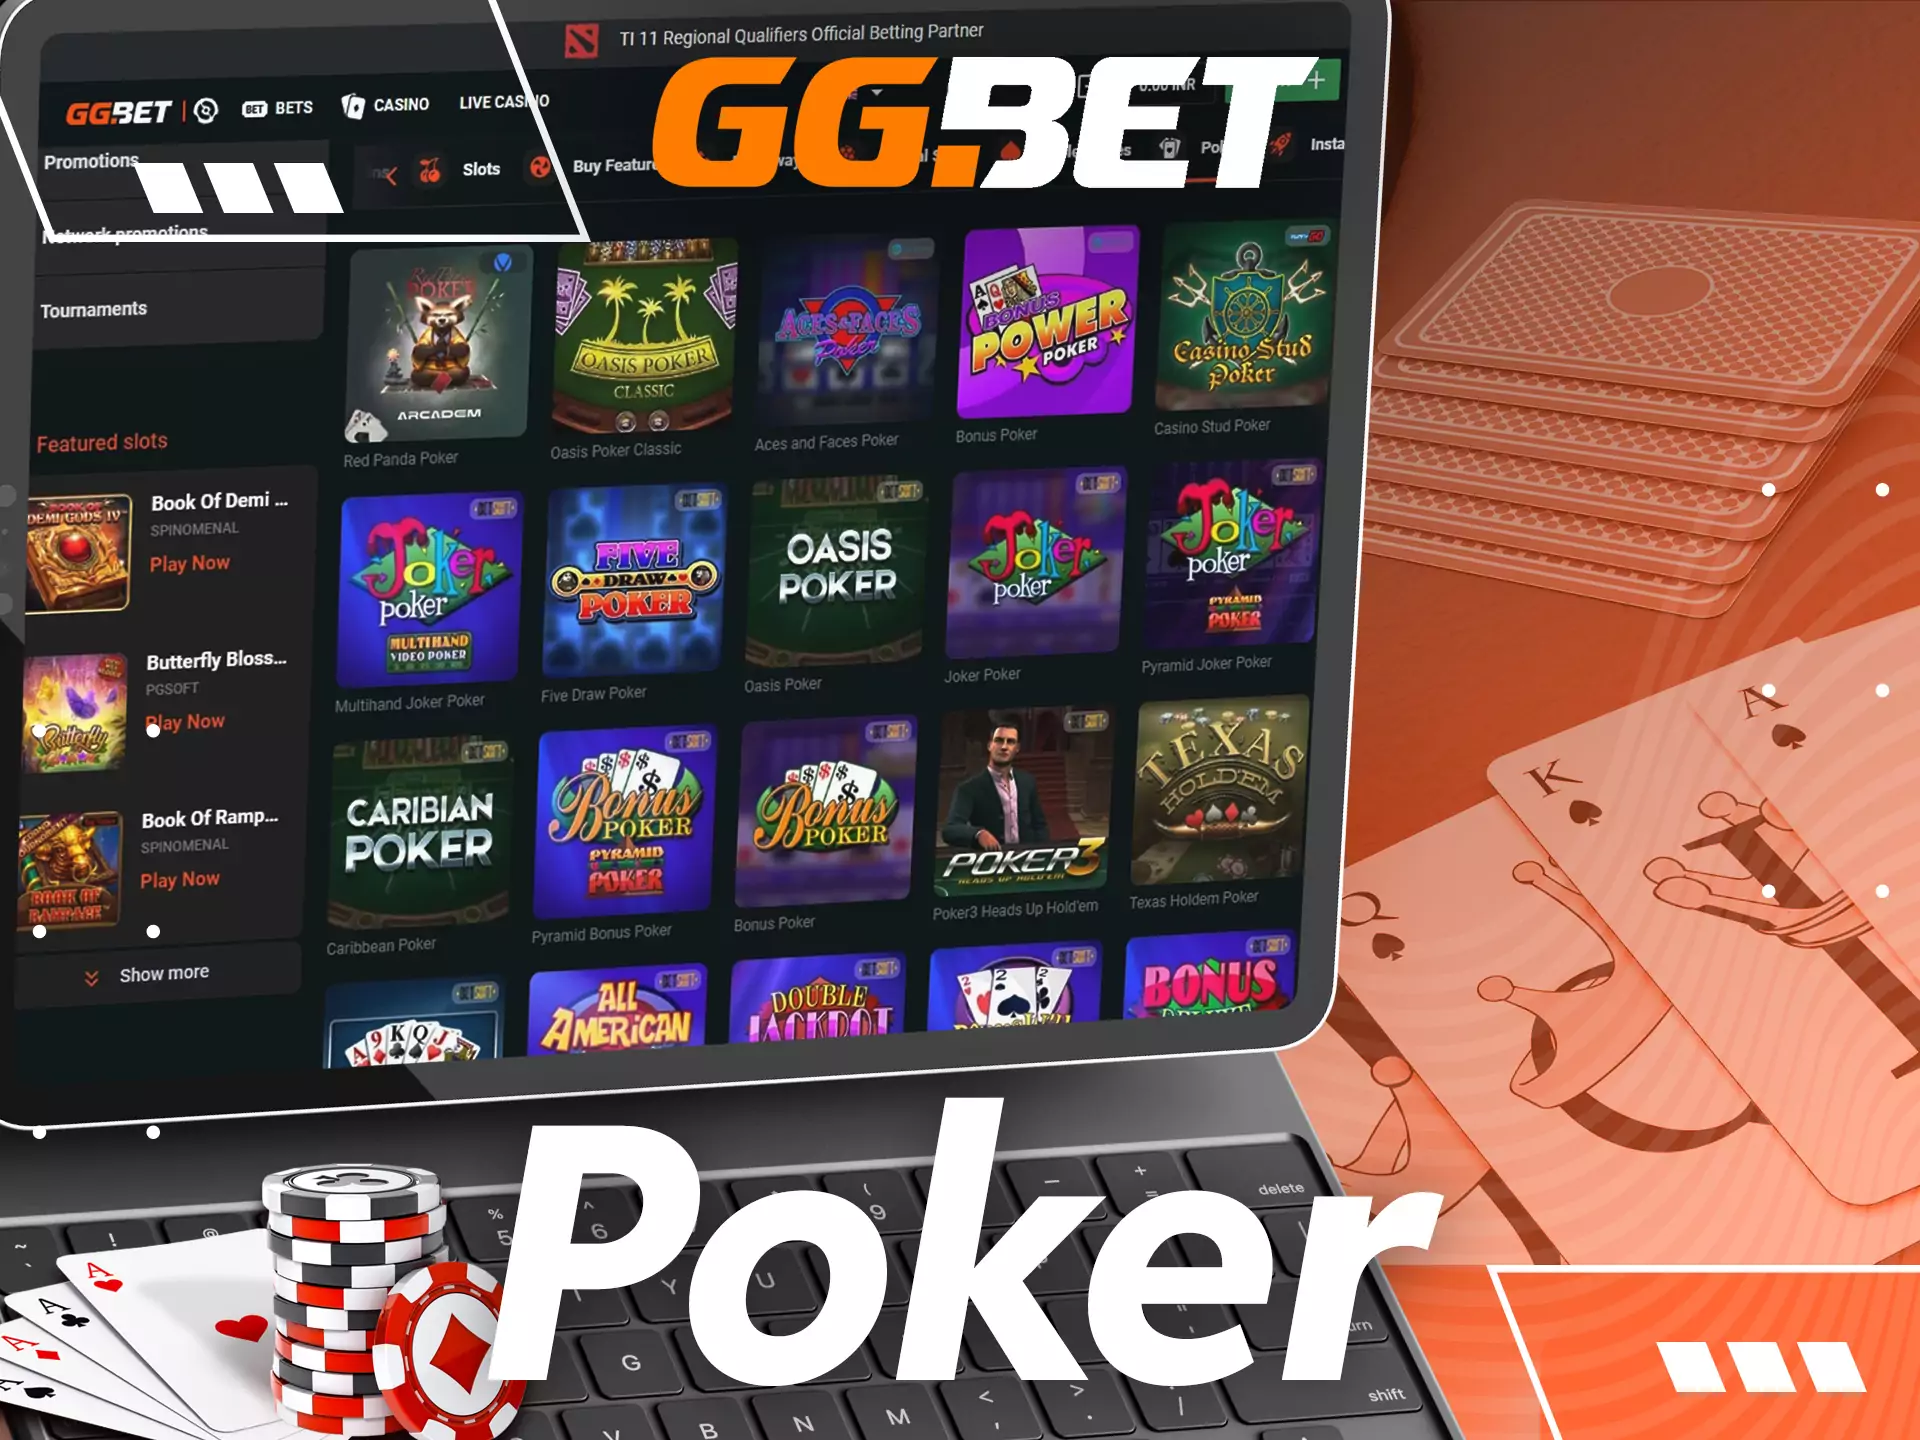 If you like poker, visit the online GGBet Casino.